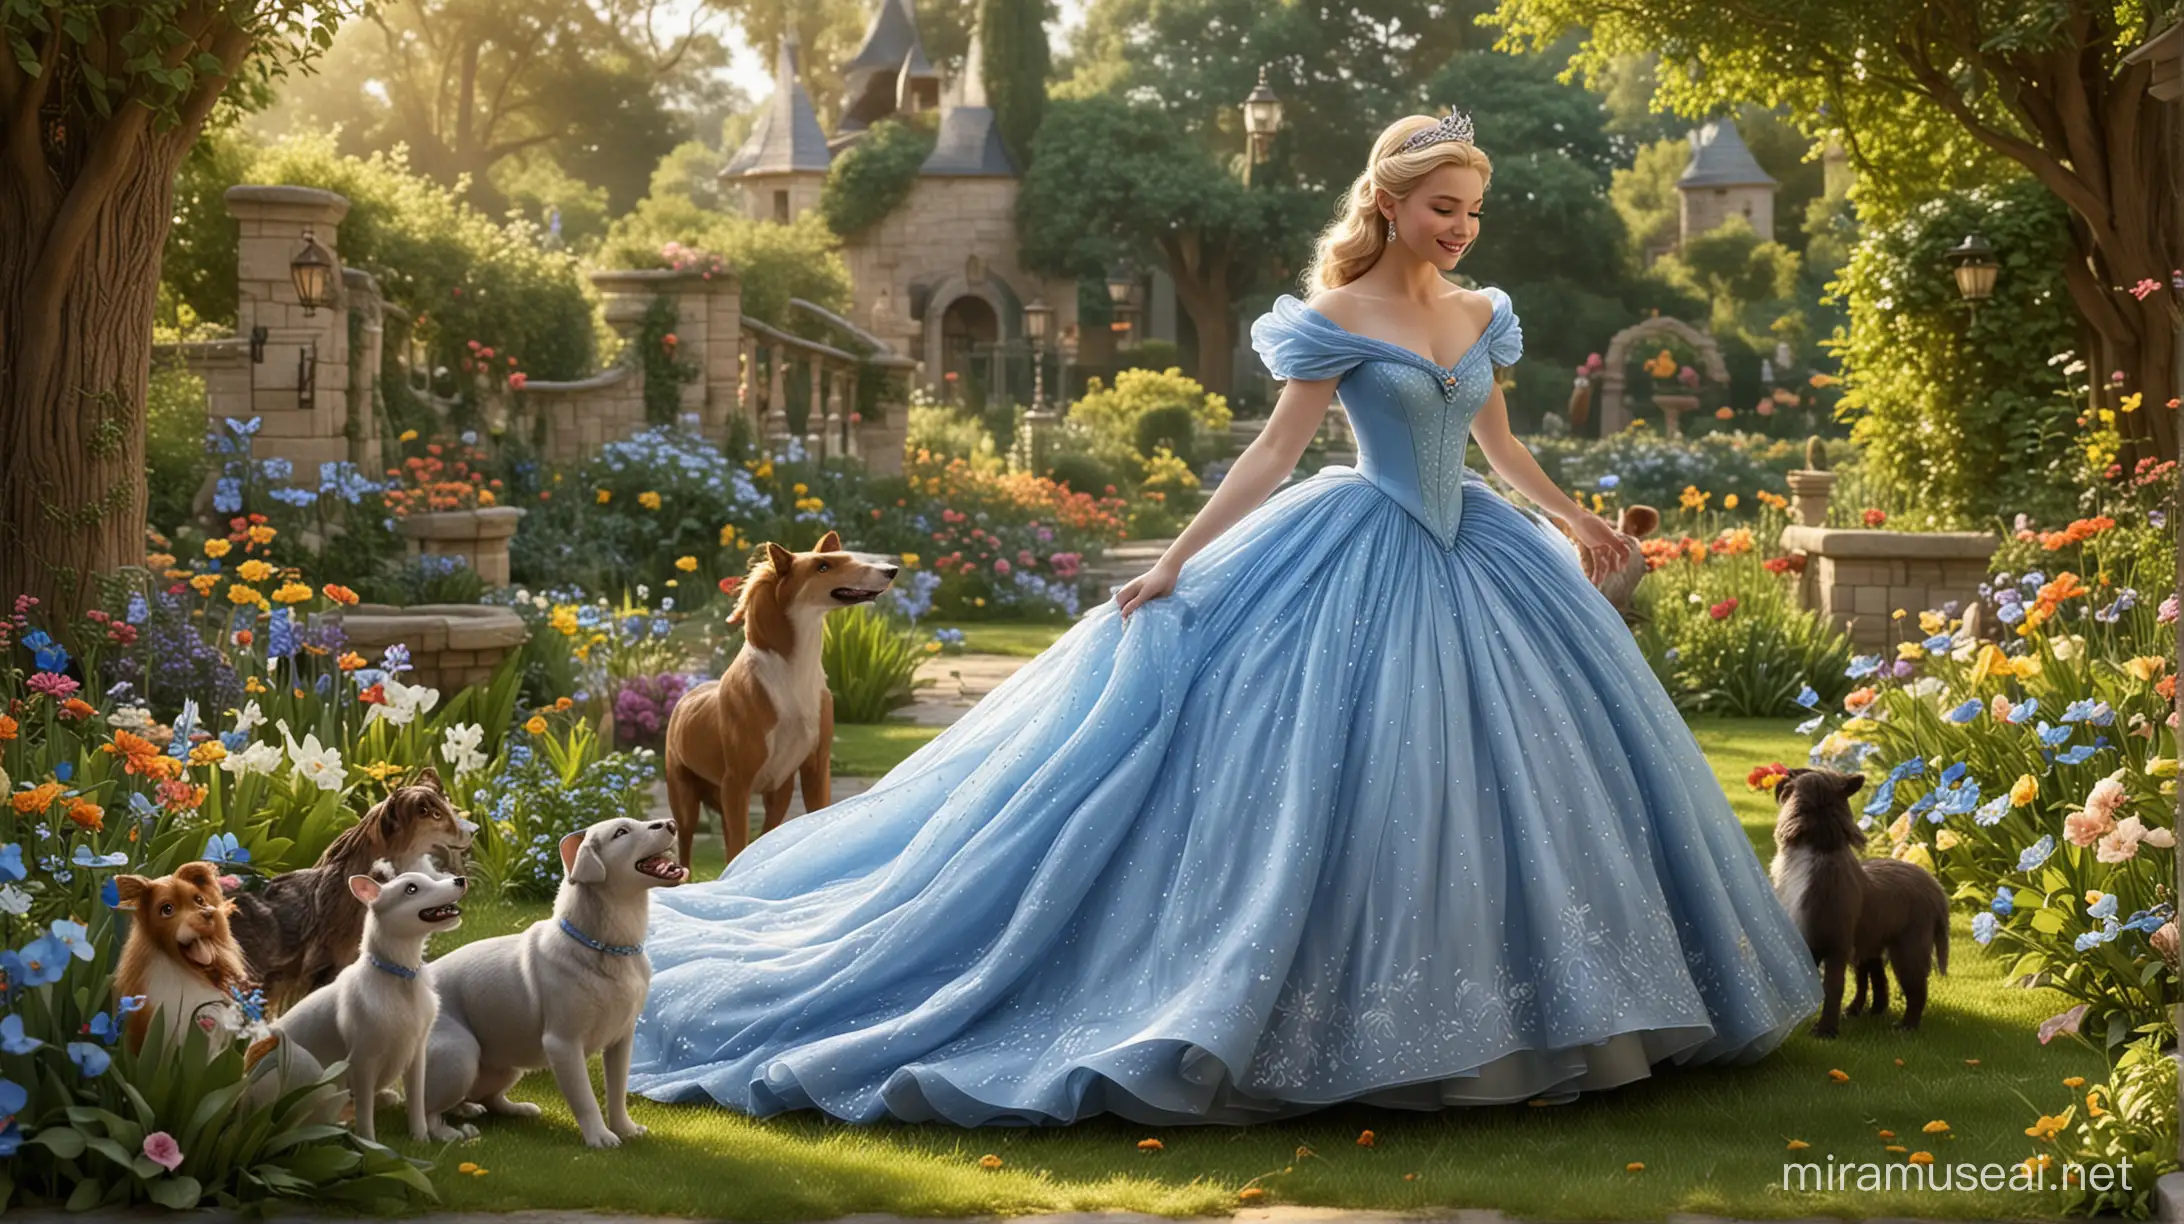 A disney princess "Cinderella" wearing her beautiful blue dress and playing with her animal friends in a beautiful garden and feeding them